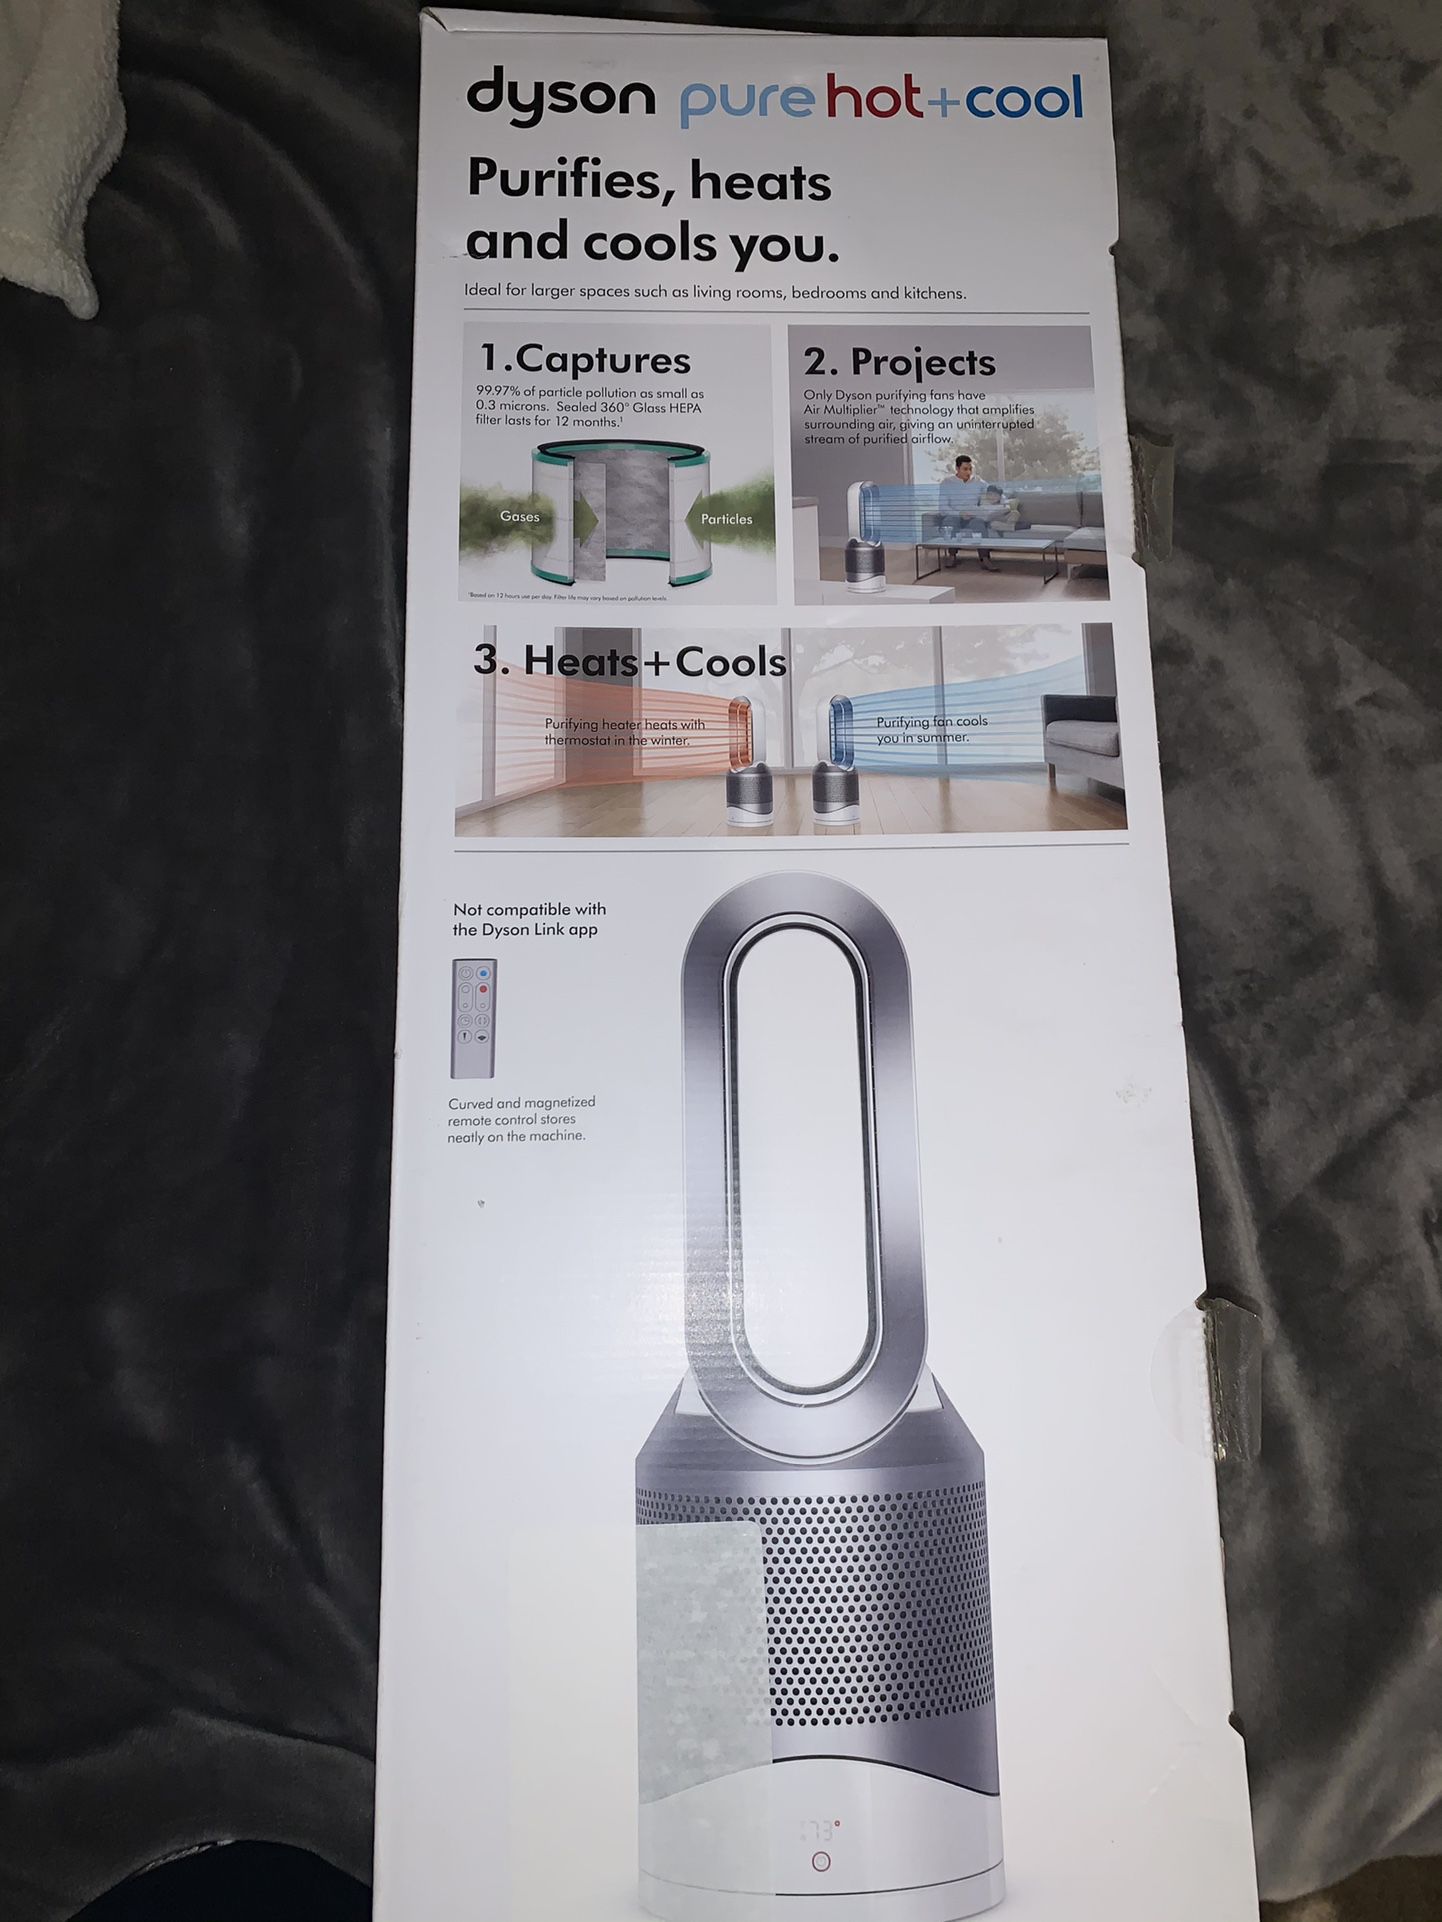 Dyson pure hot and cold also purifies